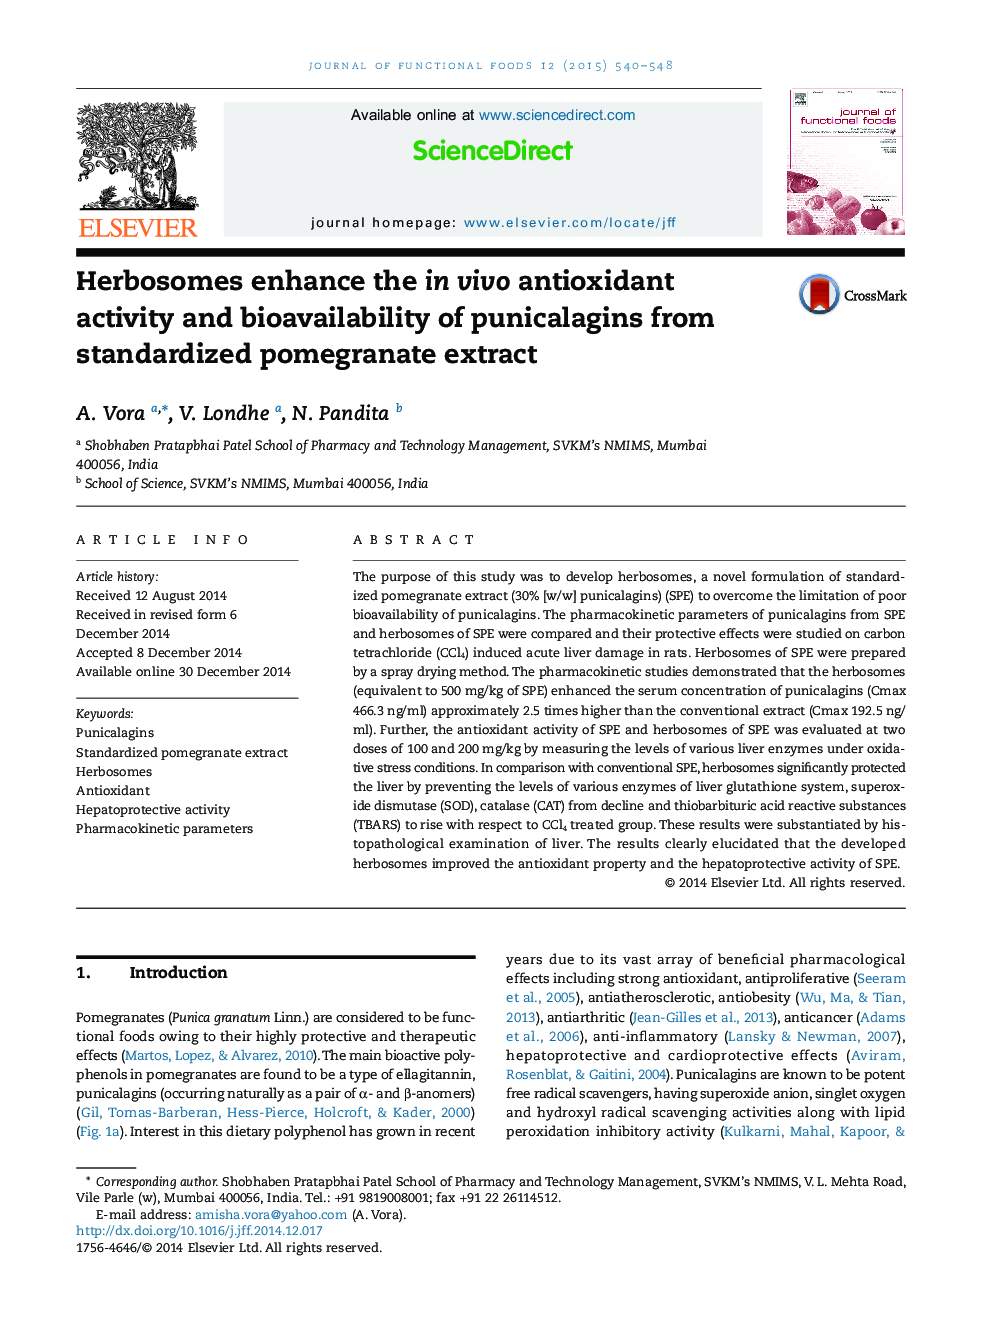 Herbosomes enhance the in vivo antioxidant activity and bioavailability of punicalagins from standardized pomegranate extract